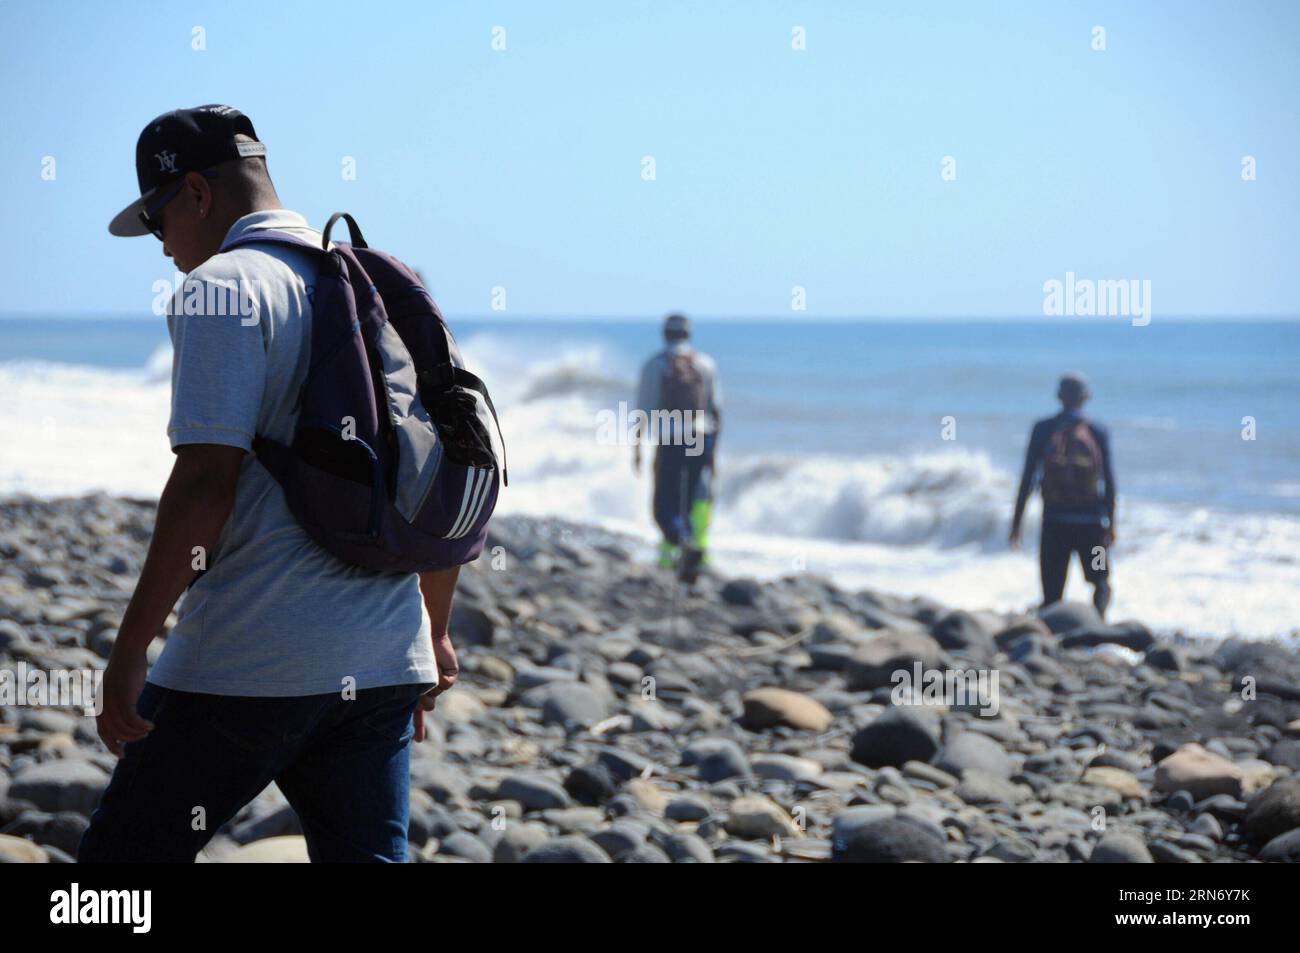 (150810) -- LA REUNION, Aug. 10, 2015 -- Searchers search the Saint Andre Beach of France s overseas island La Reunion in the Indian Ocean, where the first piece of debris from the missing Malaysian Airlines flight MH370 was found, on Aug. 10, 2015. France on Aug. 7 announced that hunts for more MH370 debris will continue for at least a week off la Reunion after a wing section was spotted near the island. ) LA REUNION-MH370 DEBRIS-SEARCH-CONTINUE ZhangxChuanshi PUBLICATIONxNOTxINxCHN   150810 La Reunion Aug 10 2015 Searchers Search The Saint André Beach of France S Overseas Iceland La Reunion Stock Photo